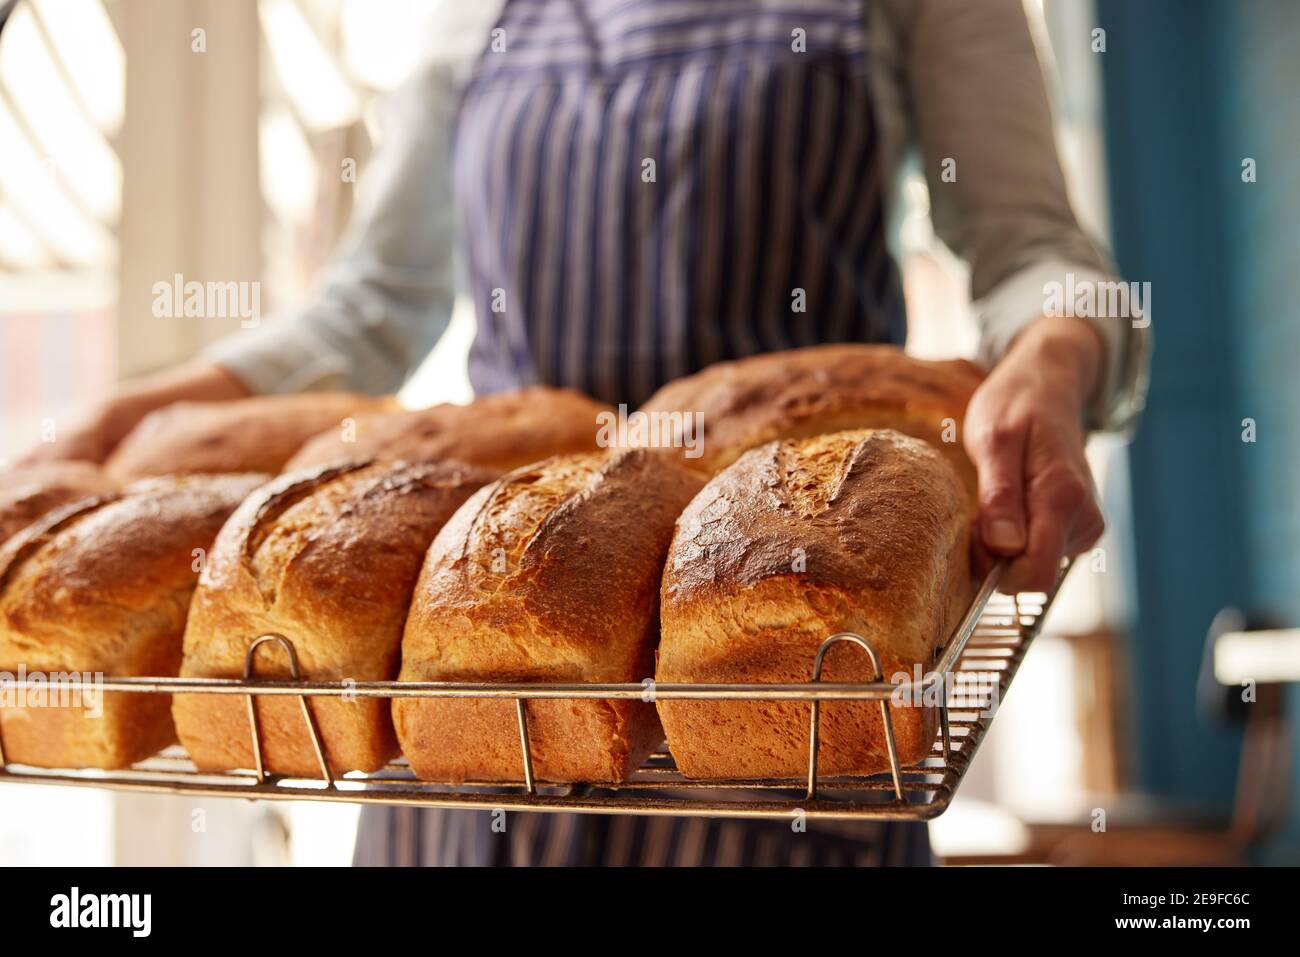 Sales Assistant In Bakery With Tray Of Freshly Baked Organic Sourdough Bread Loaves Stock Photo